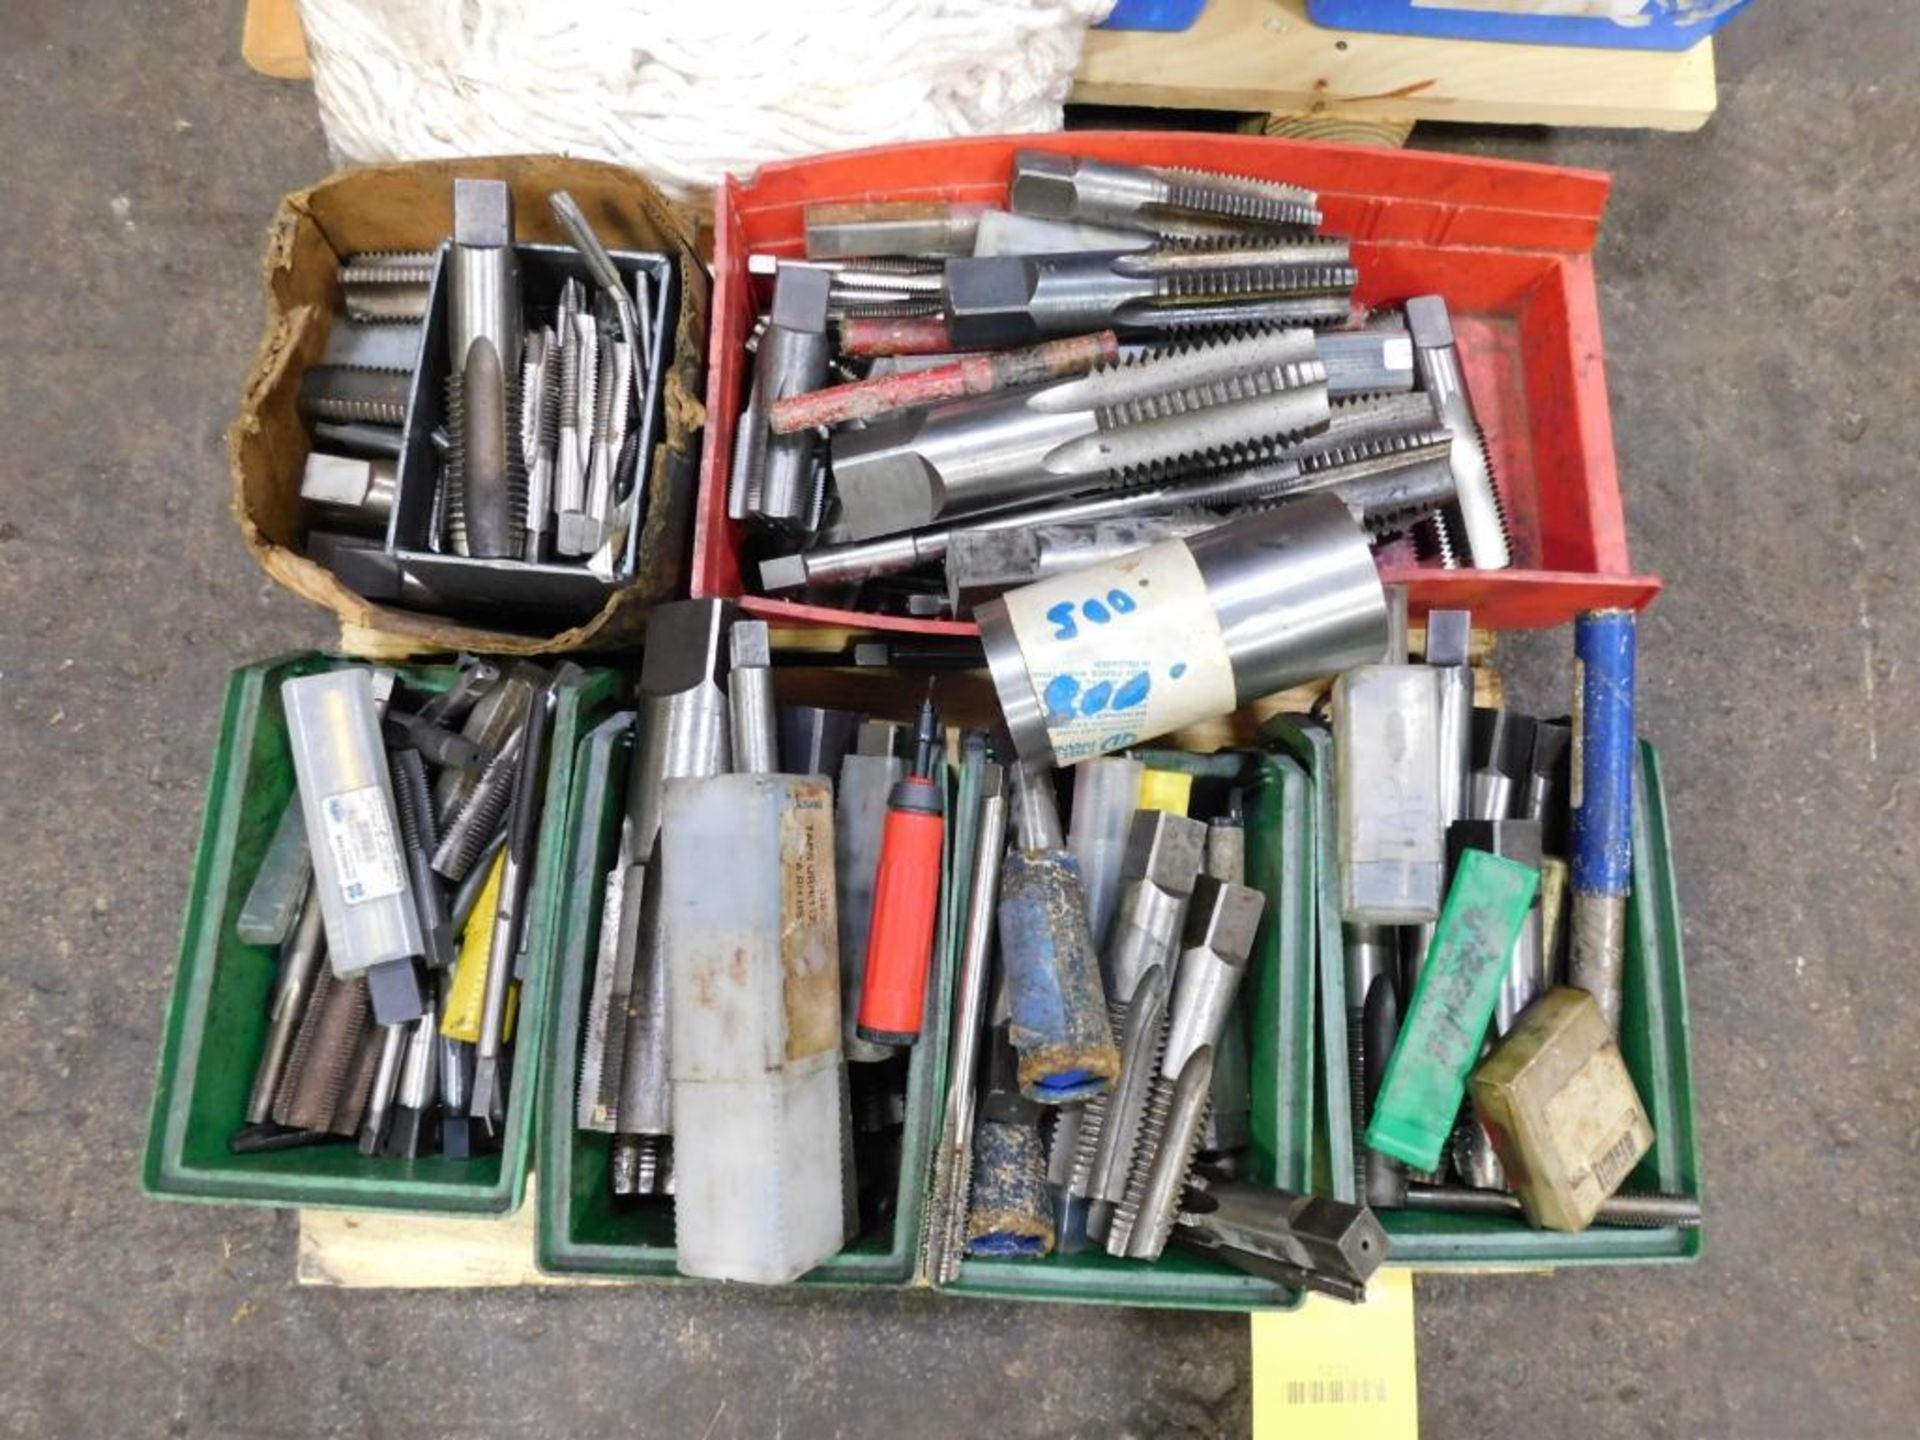 LOT: Assorted Large Roughing Endmills, Taps, Spade Drills, Taper Shank Drill Bits, Chuck Keys, Wrenc - Image 2 of 6